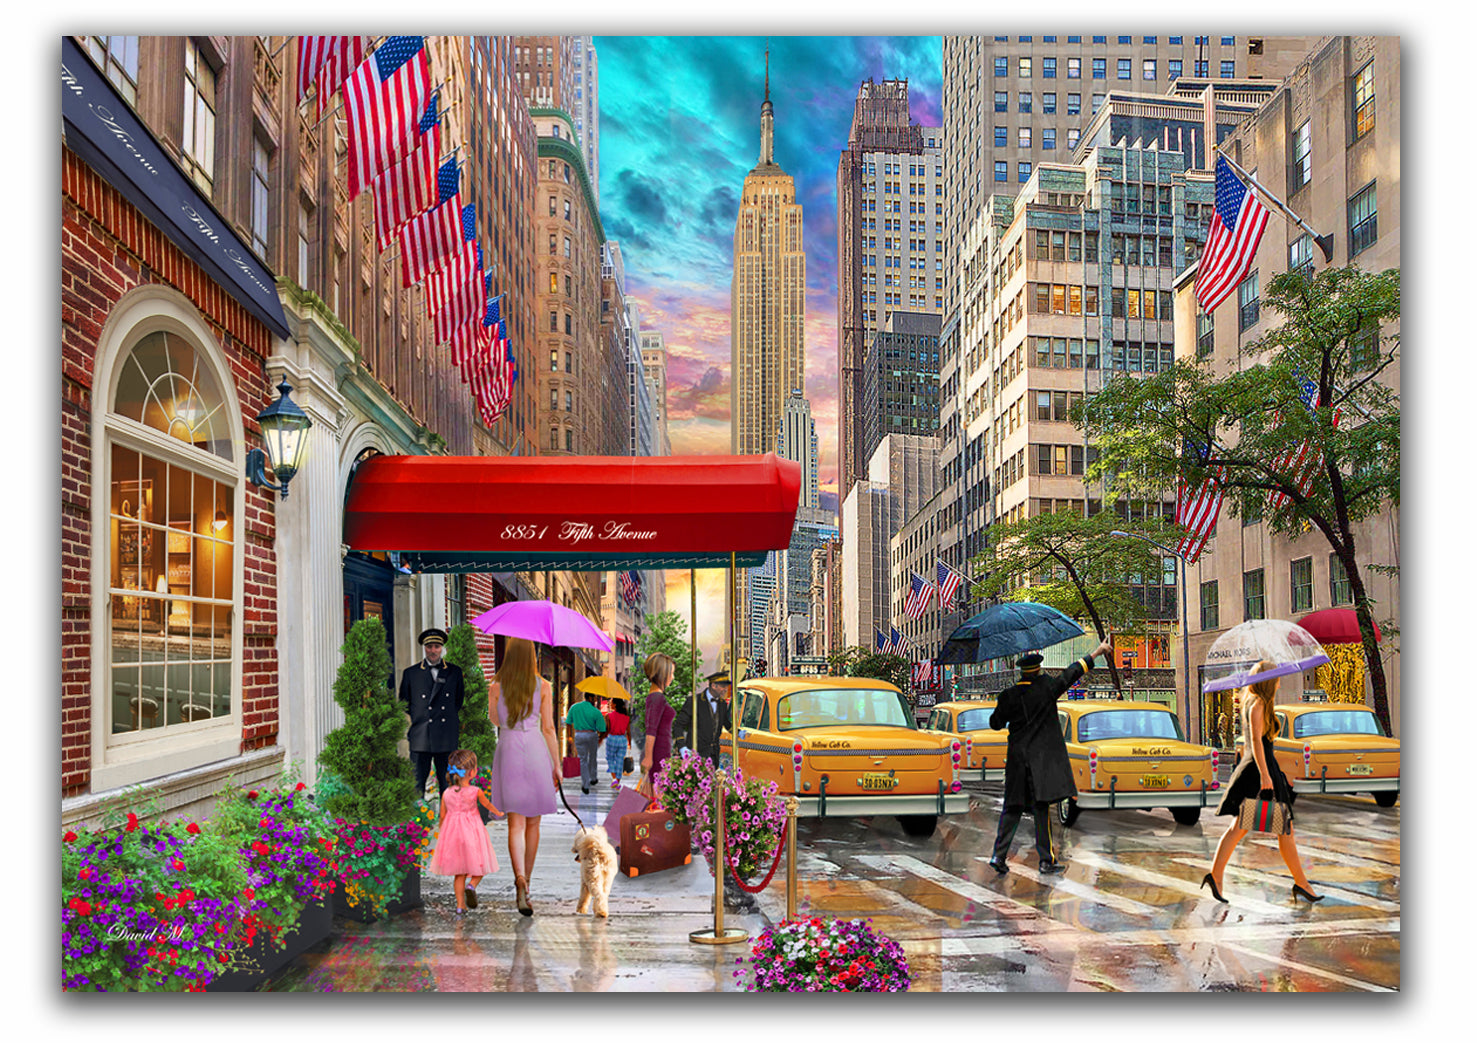 Visit 5th Avenue - The Famous Street in New York City